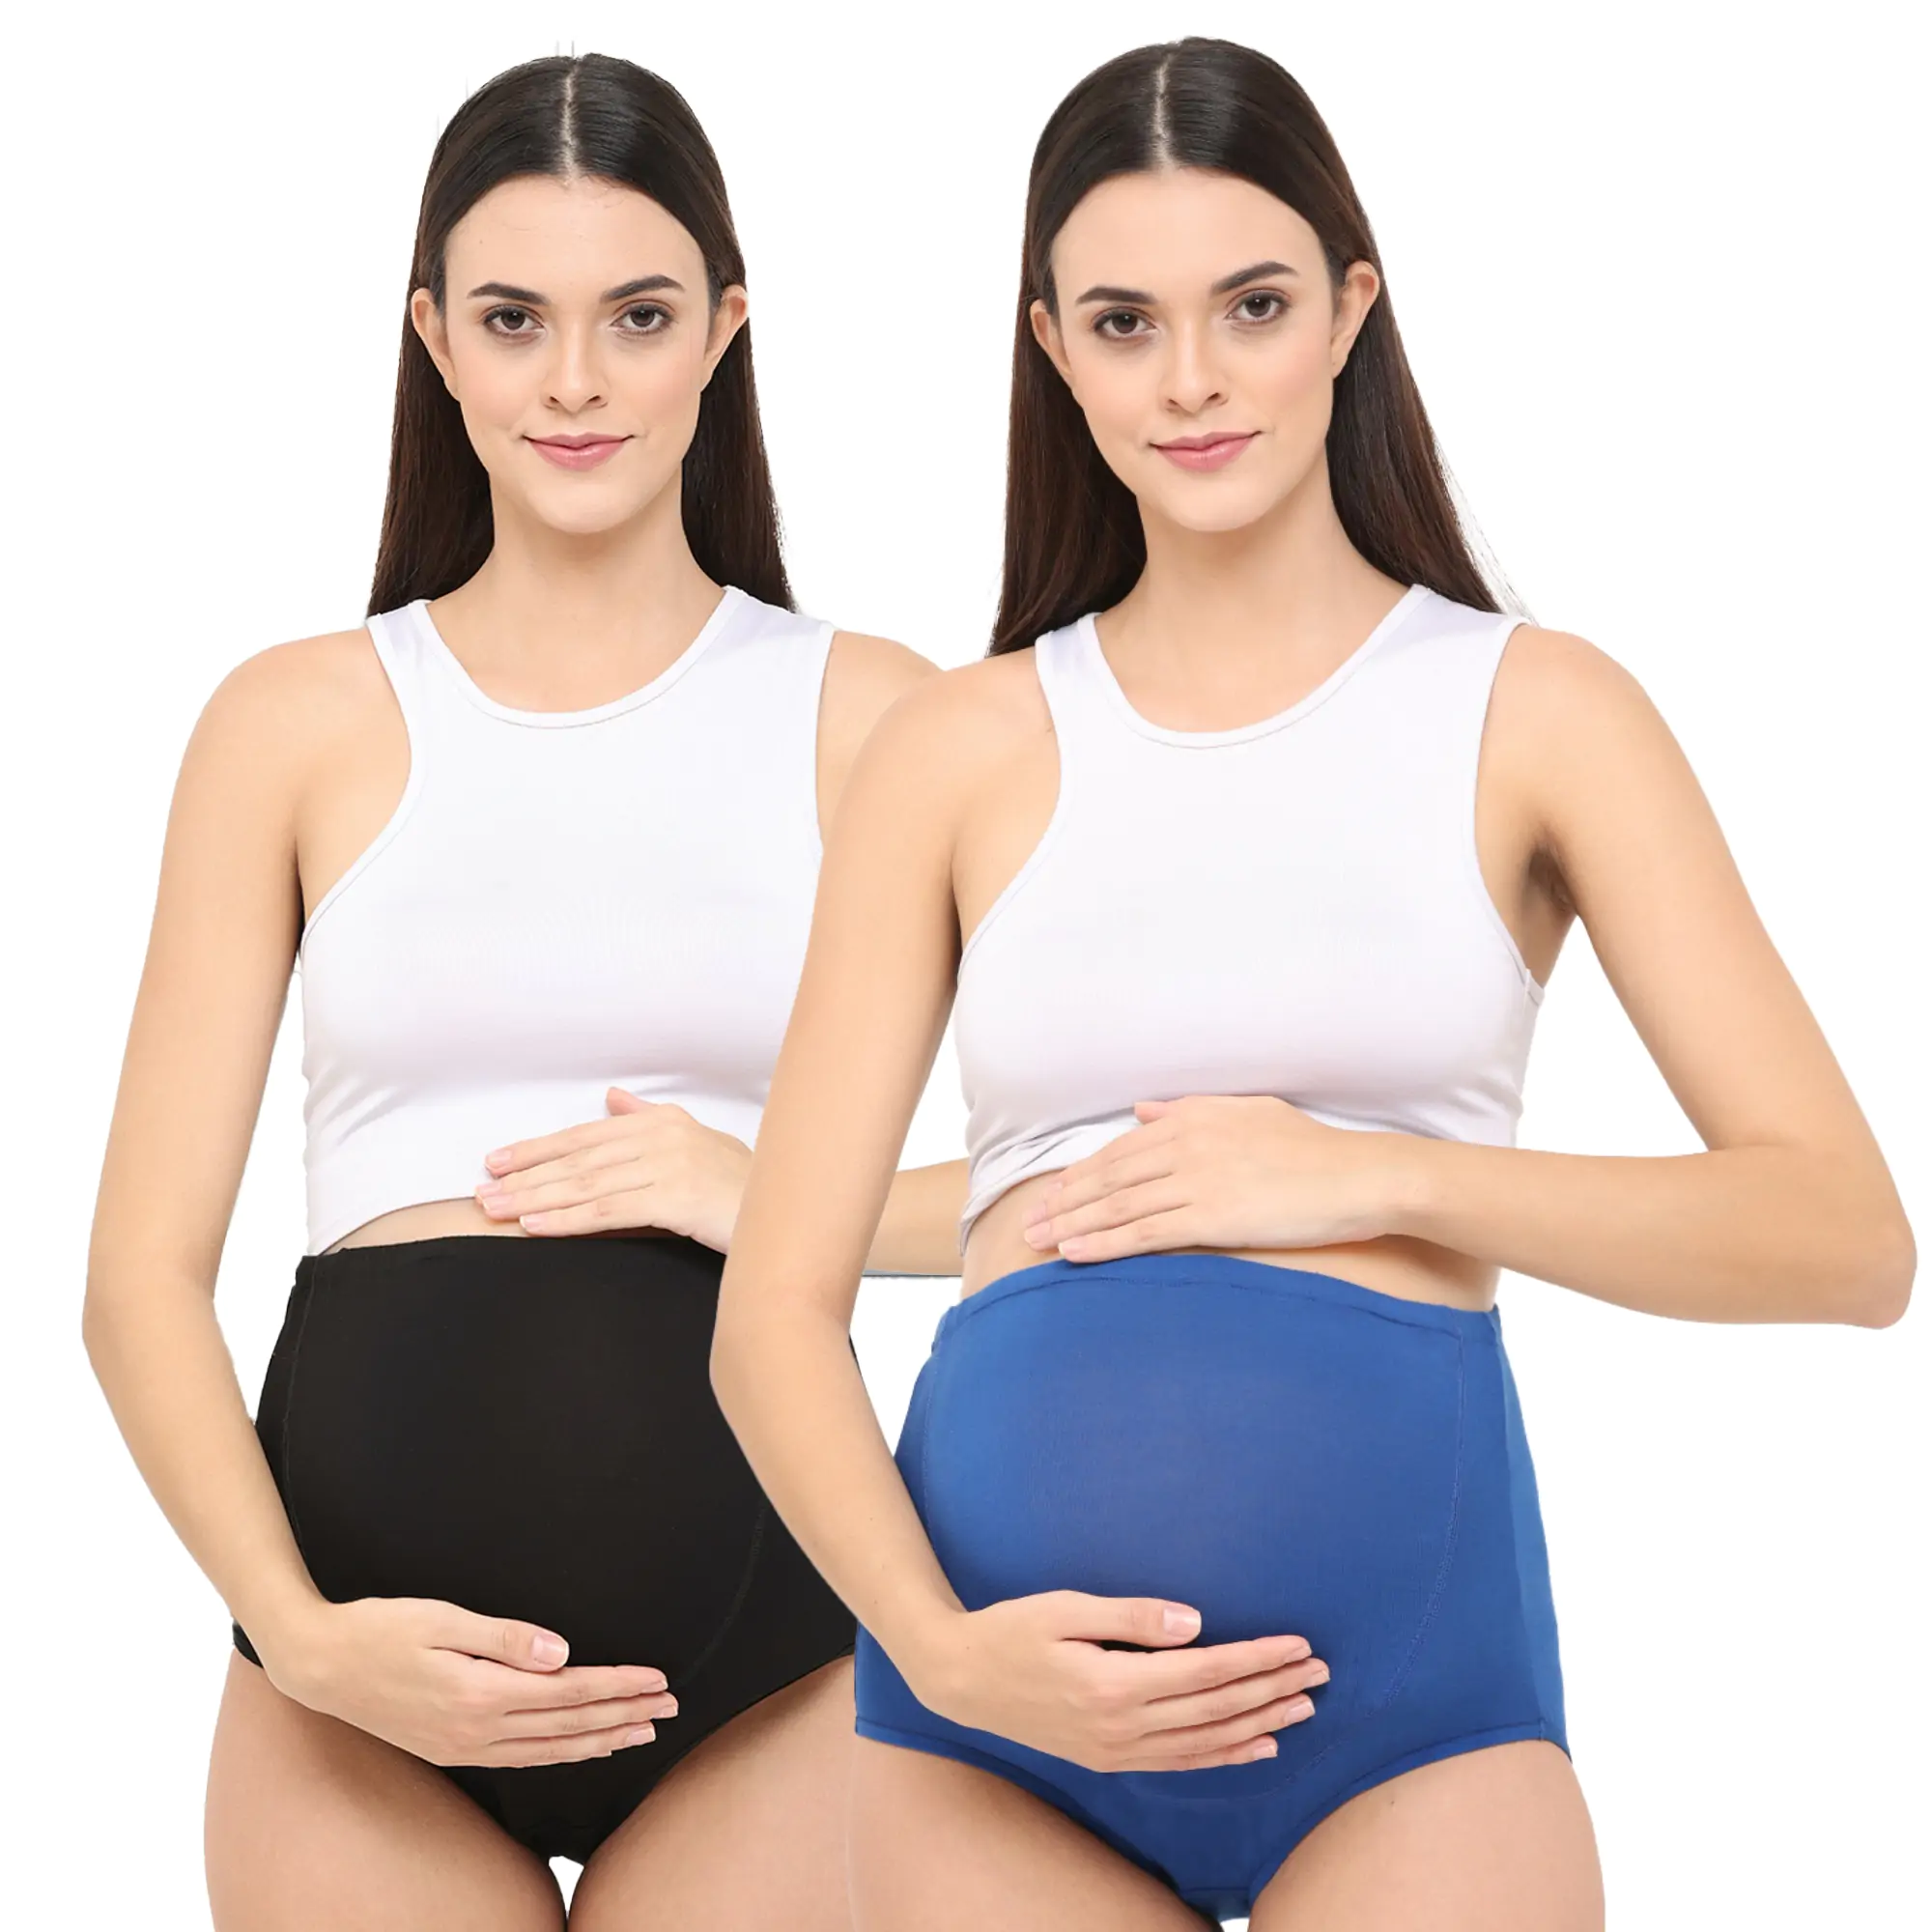 Mylo High Waist Maternity/Postpartum Panty - Anti-Microbial with Comfy Adjustable Waistband - Dazzling Blue & Black Beauty - M - Pack of 2